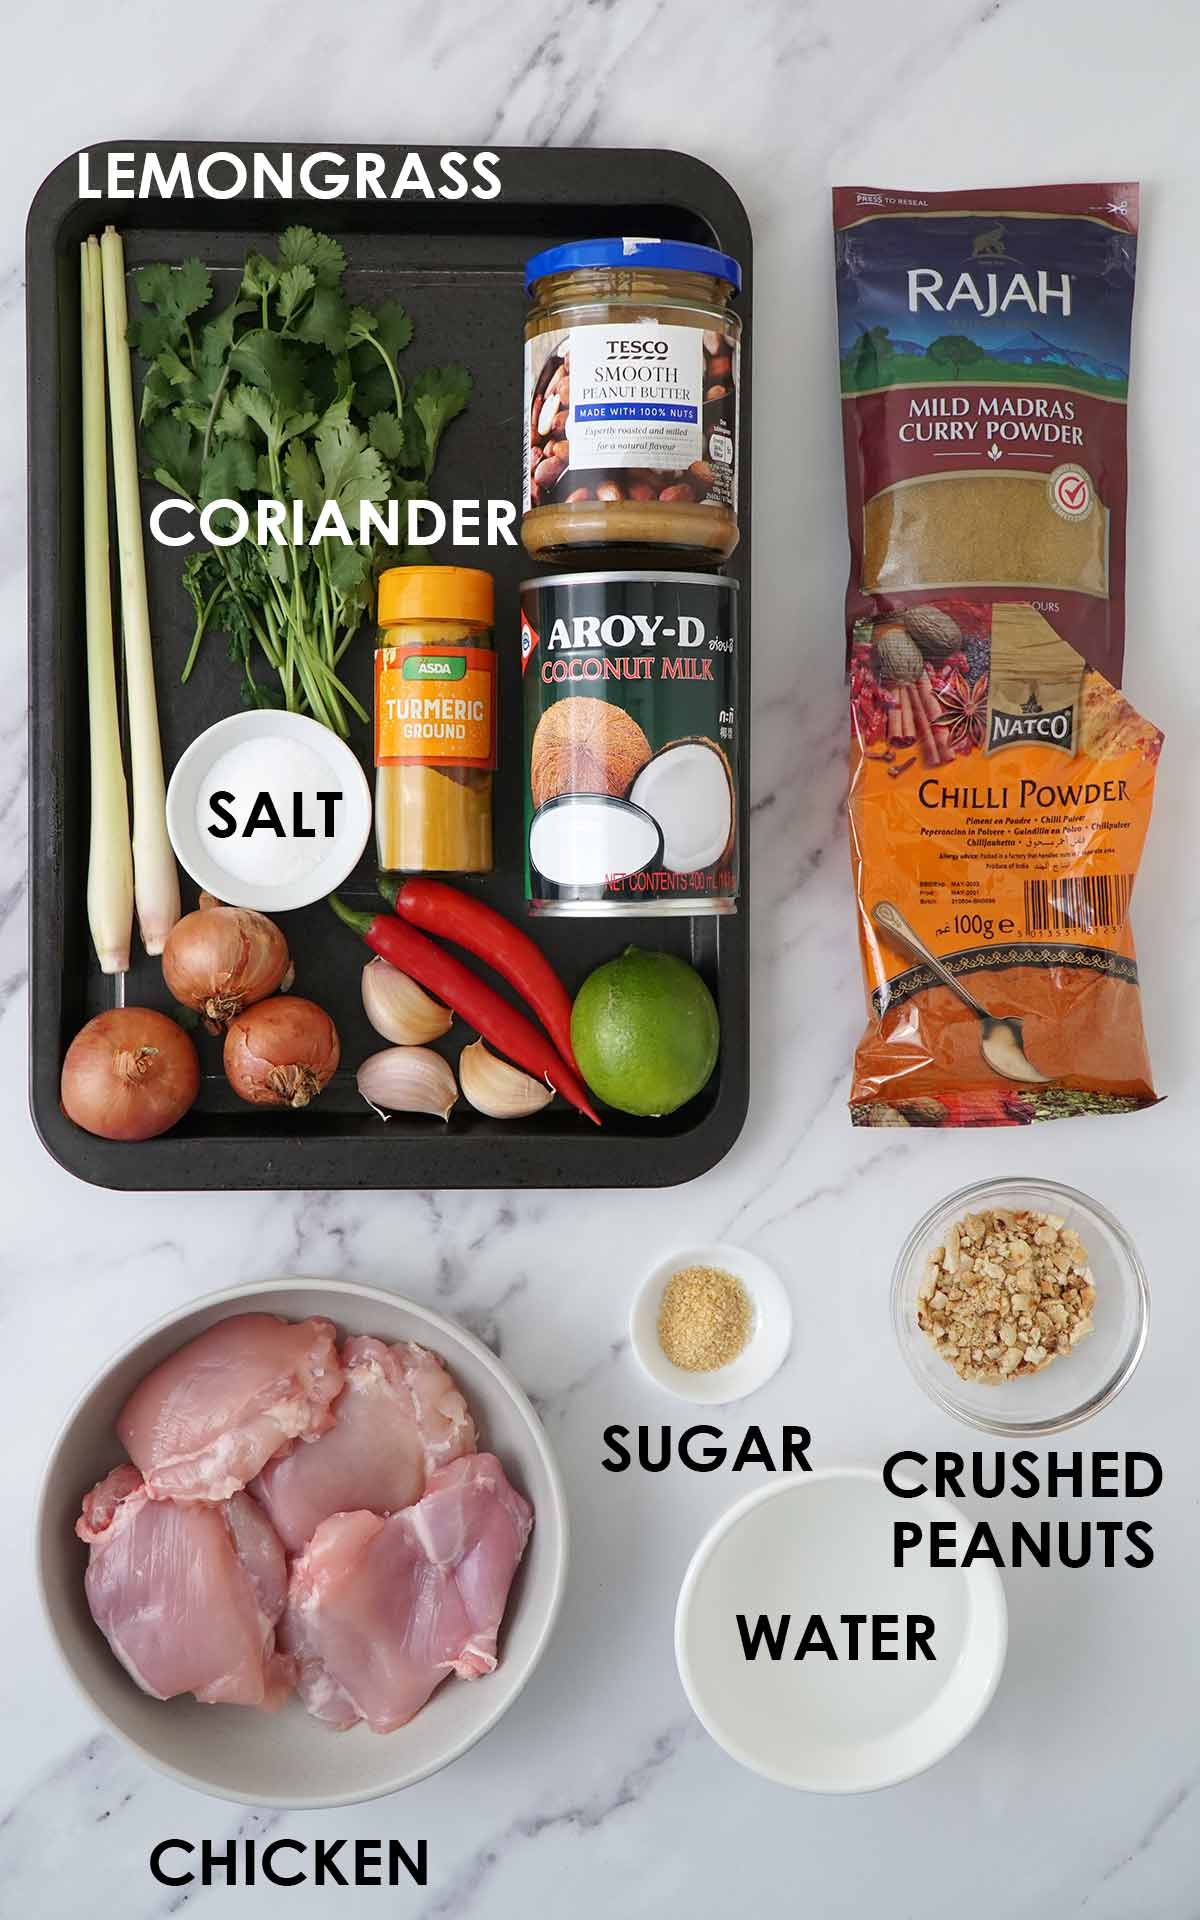 Labelled peanut butter chicken ingredients, displayed on the white table.  